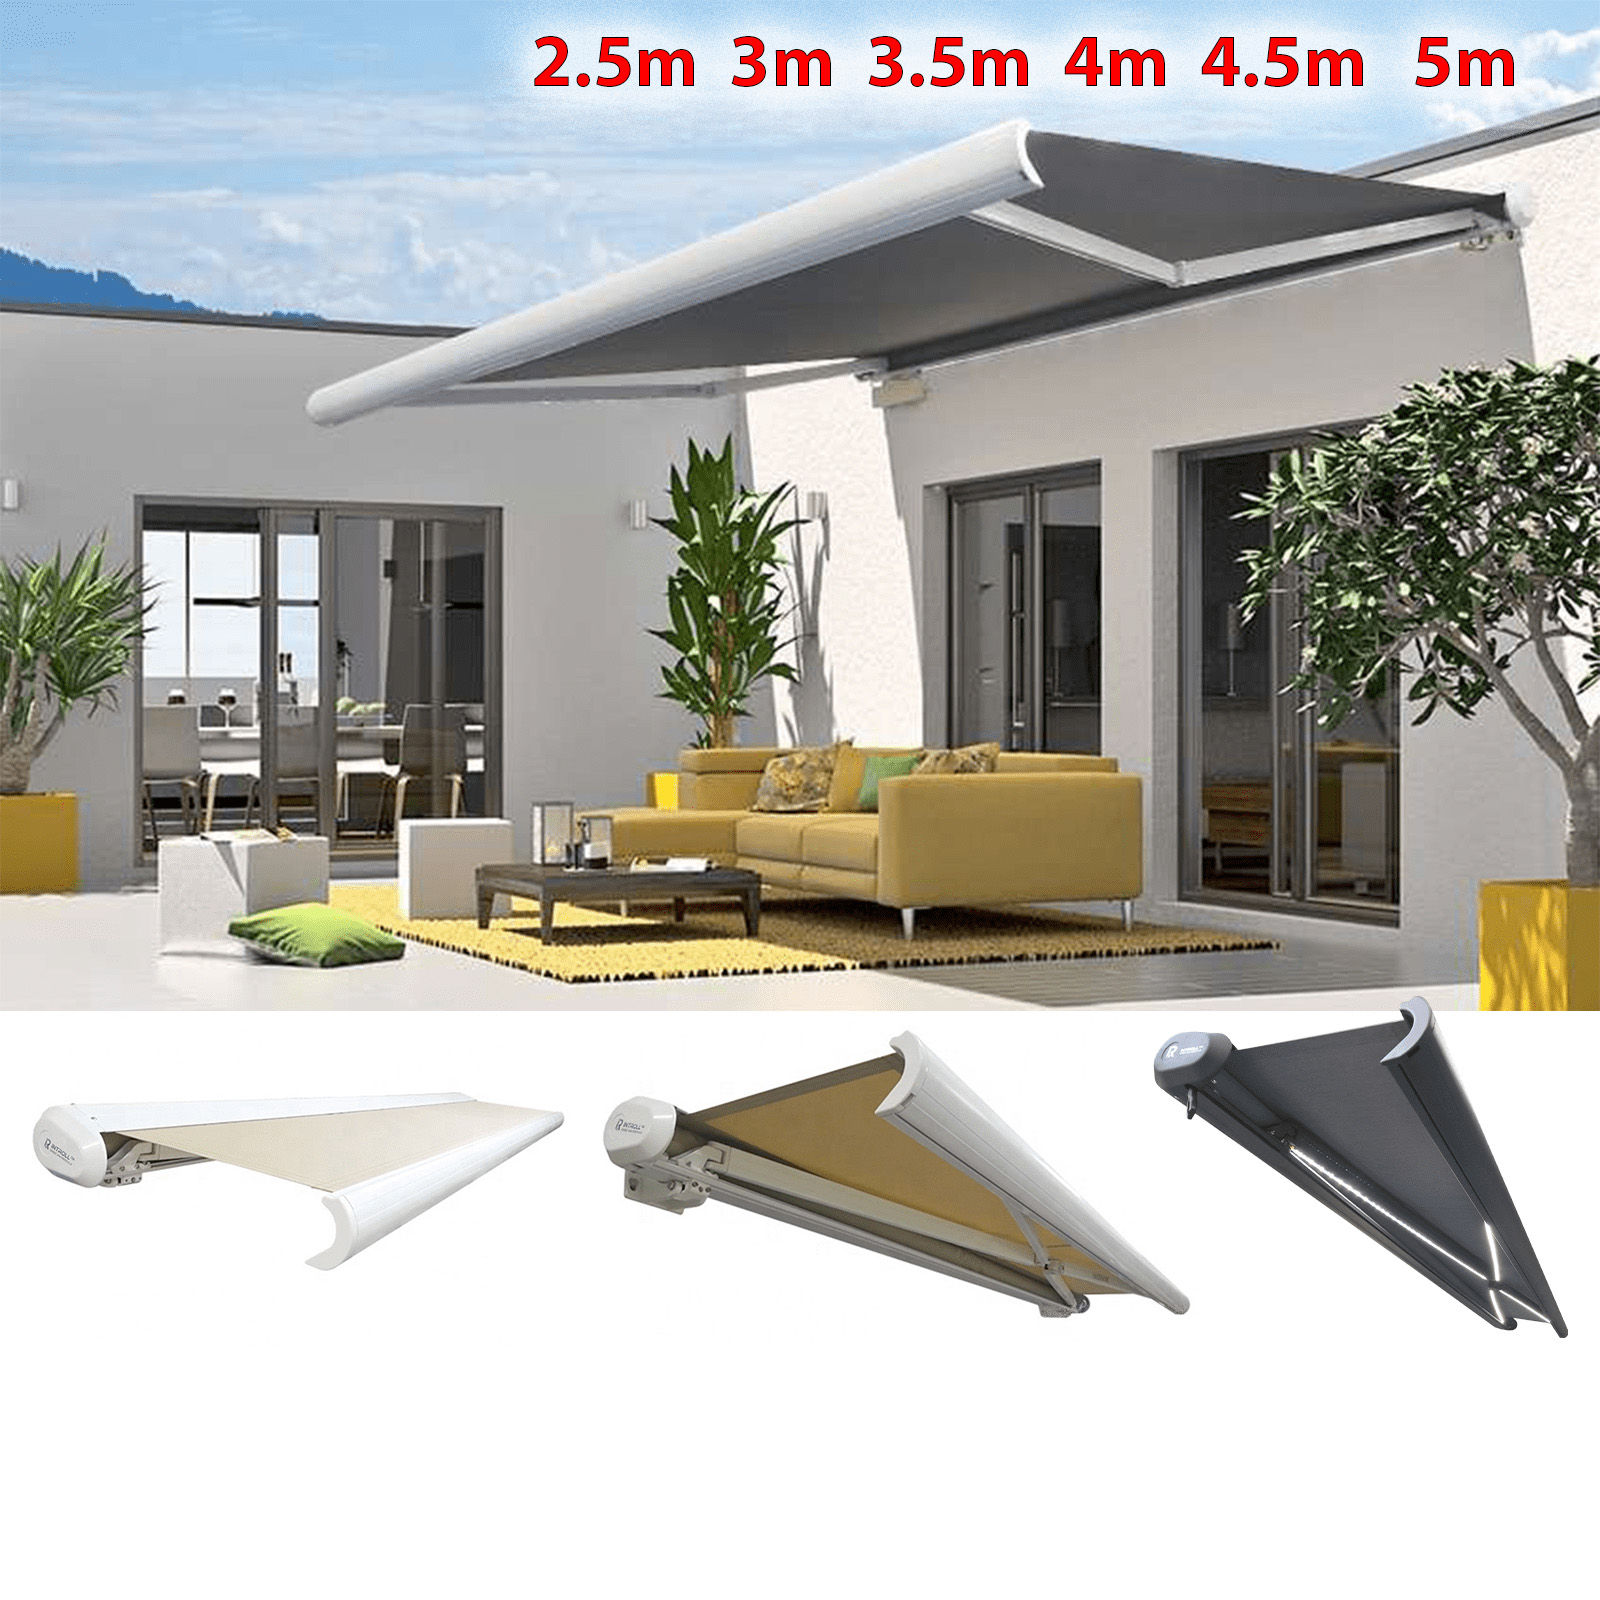 INT500 Full Cassette - Retractable Garden Patio Awnings - Electric